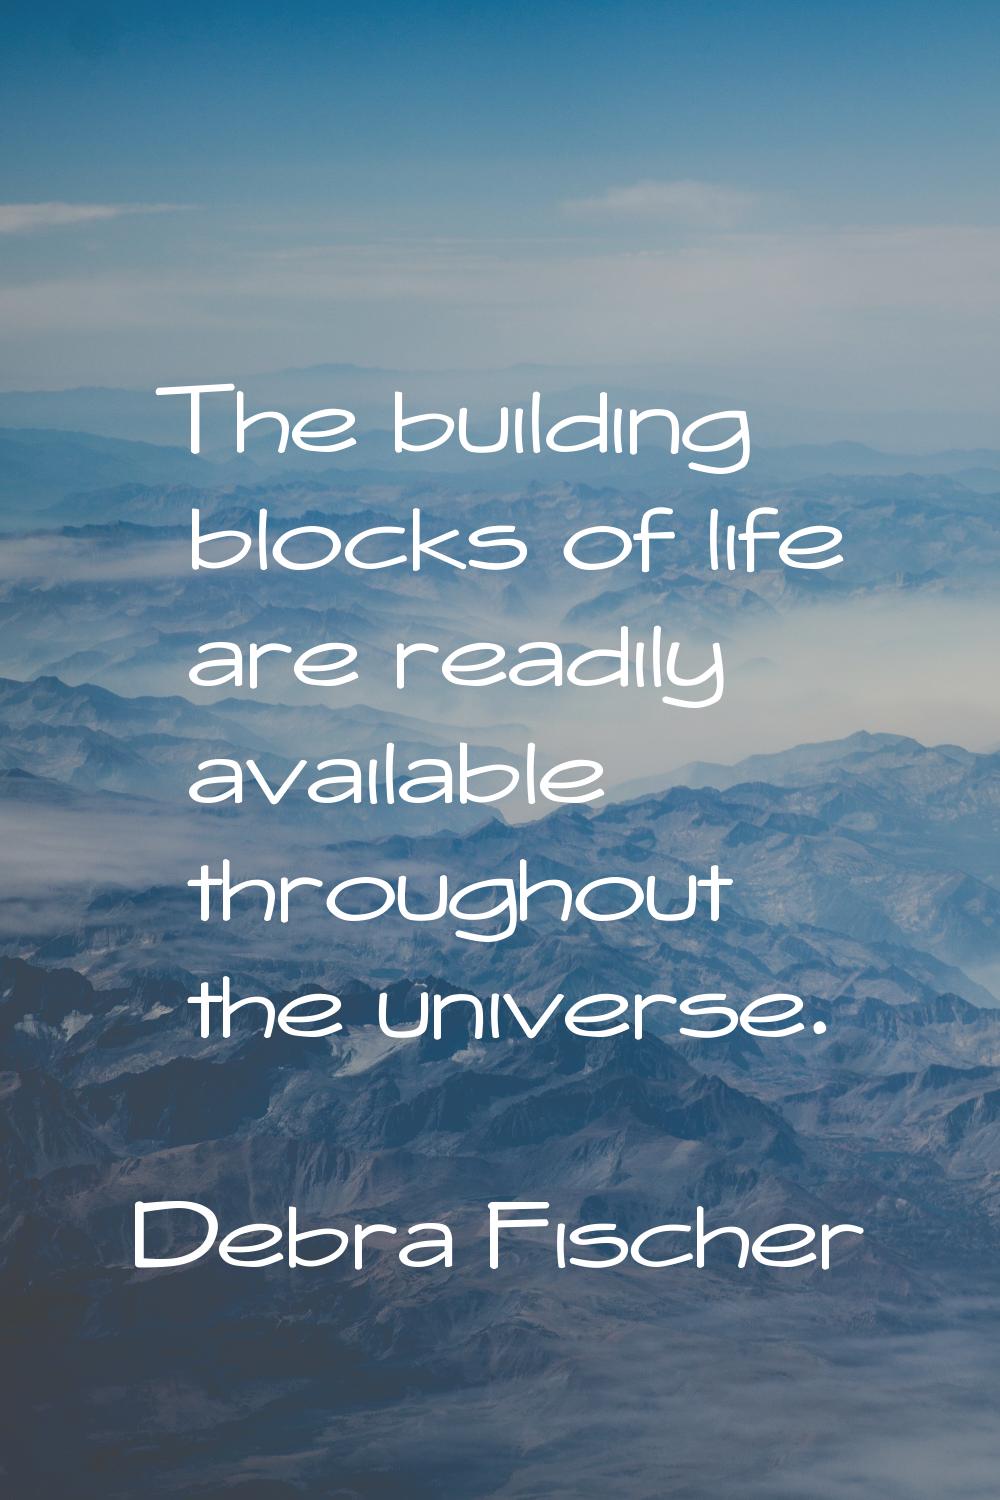 The building blocks of life are readily available throughout the universe.